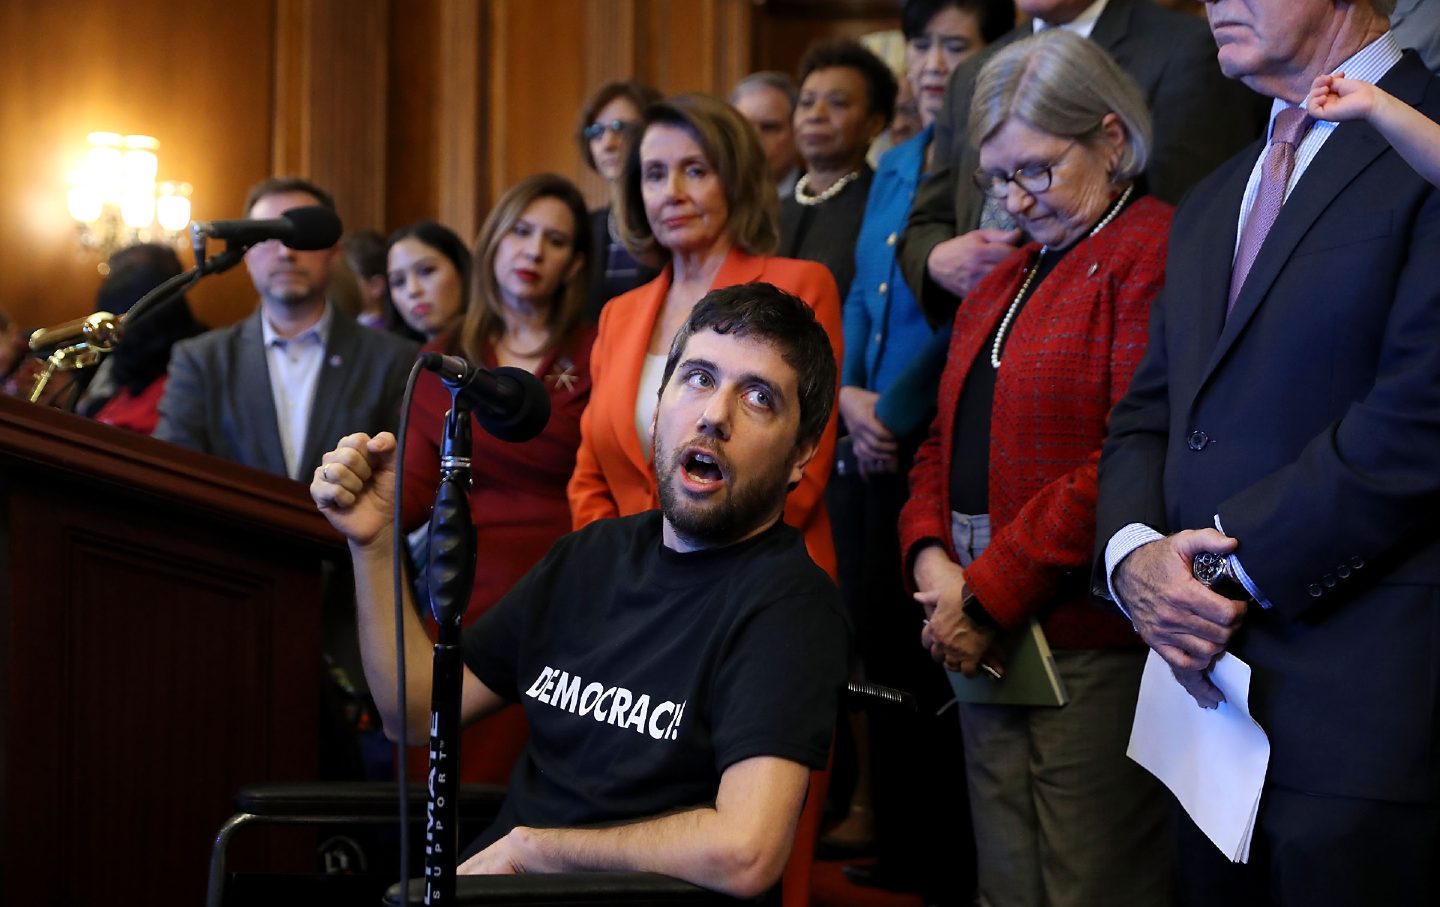 Ady Barkan (C) delivers remarks during a rally organized by House Minority Leader Nancy Pelosi (D-CA) at the U.S. Capitol December 19, 2017. (Chip Somodevilla/Getty Images)